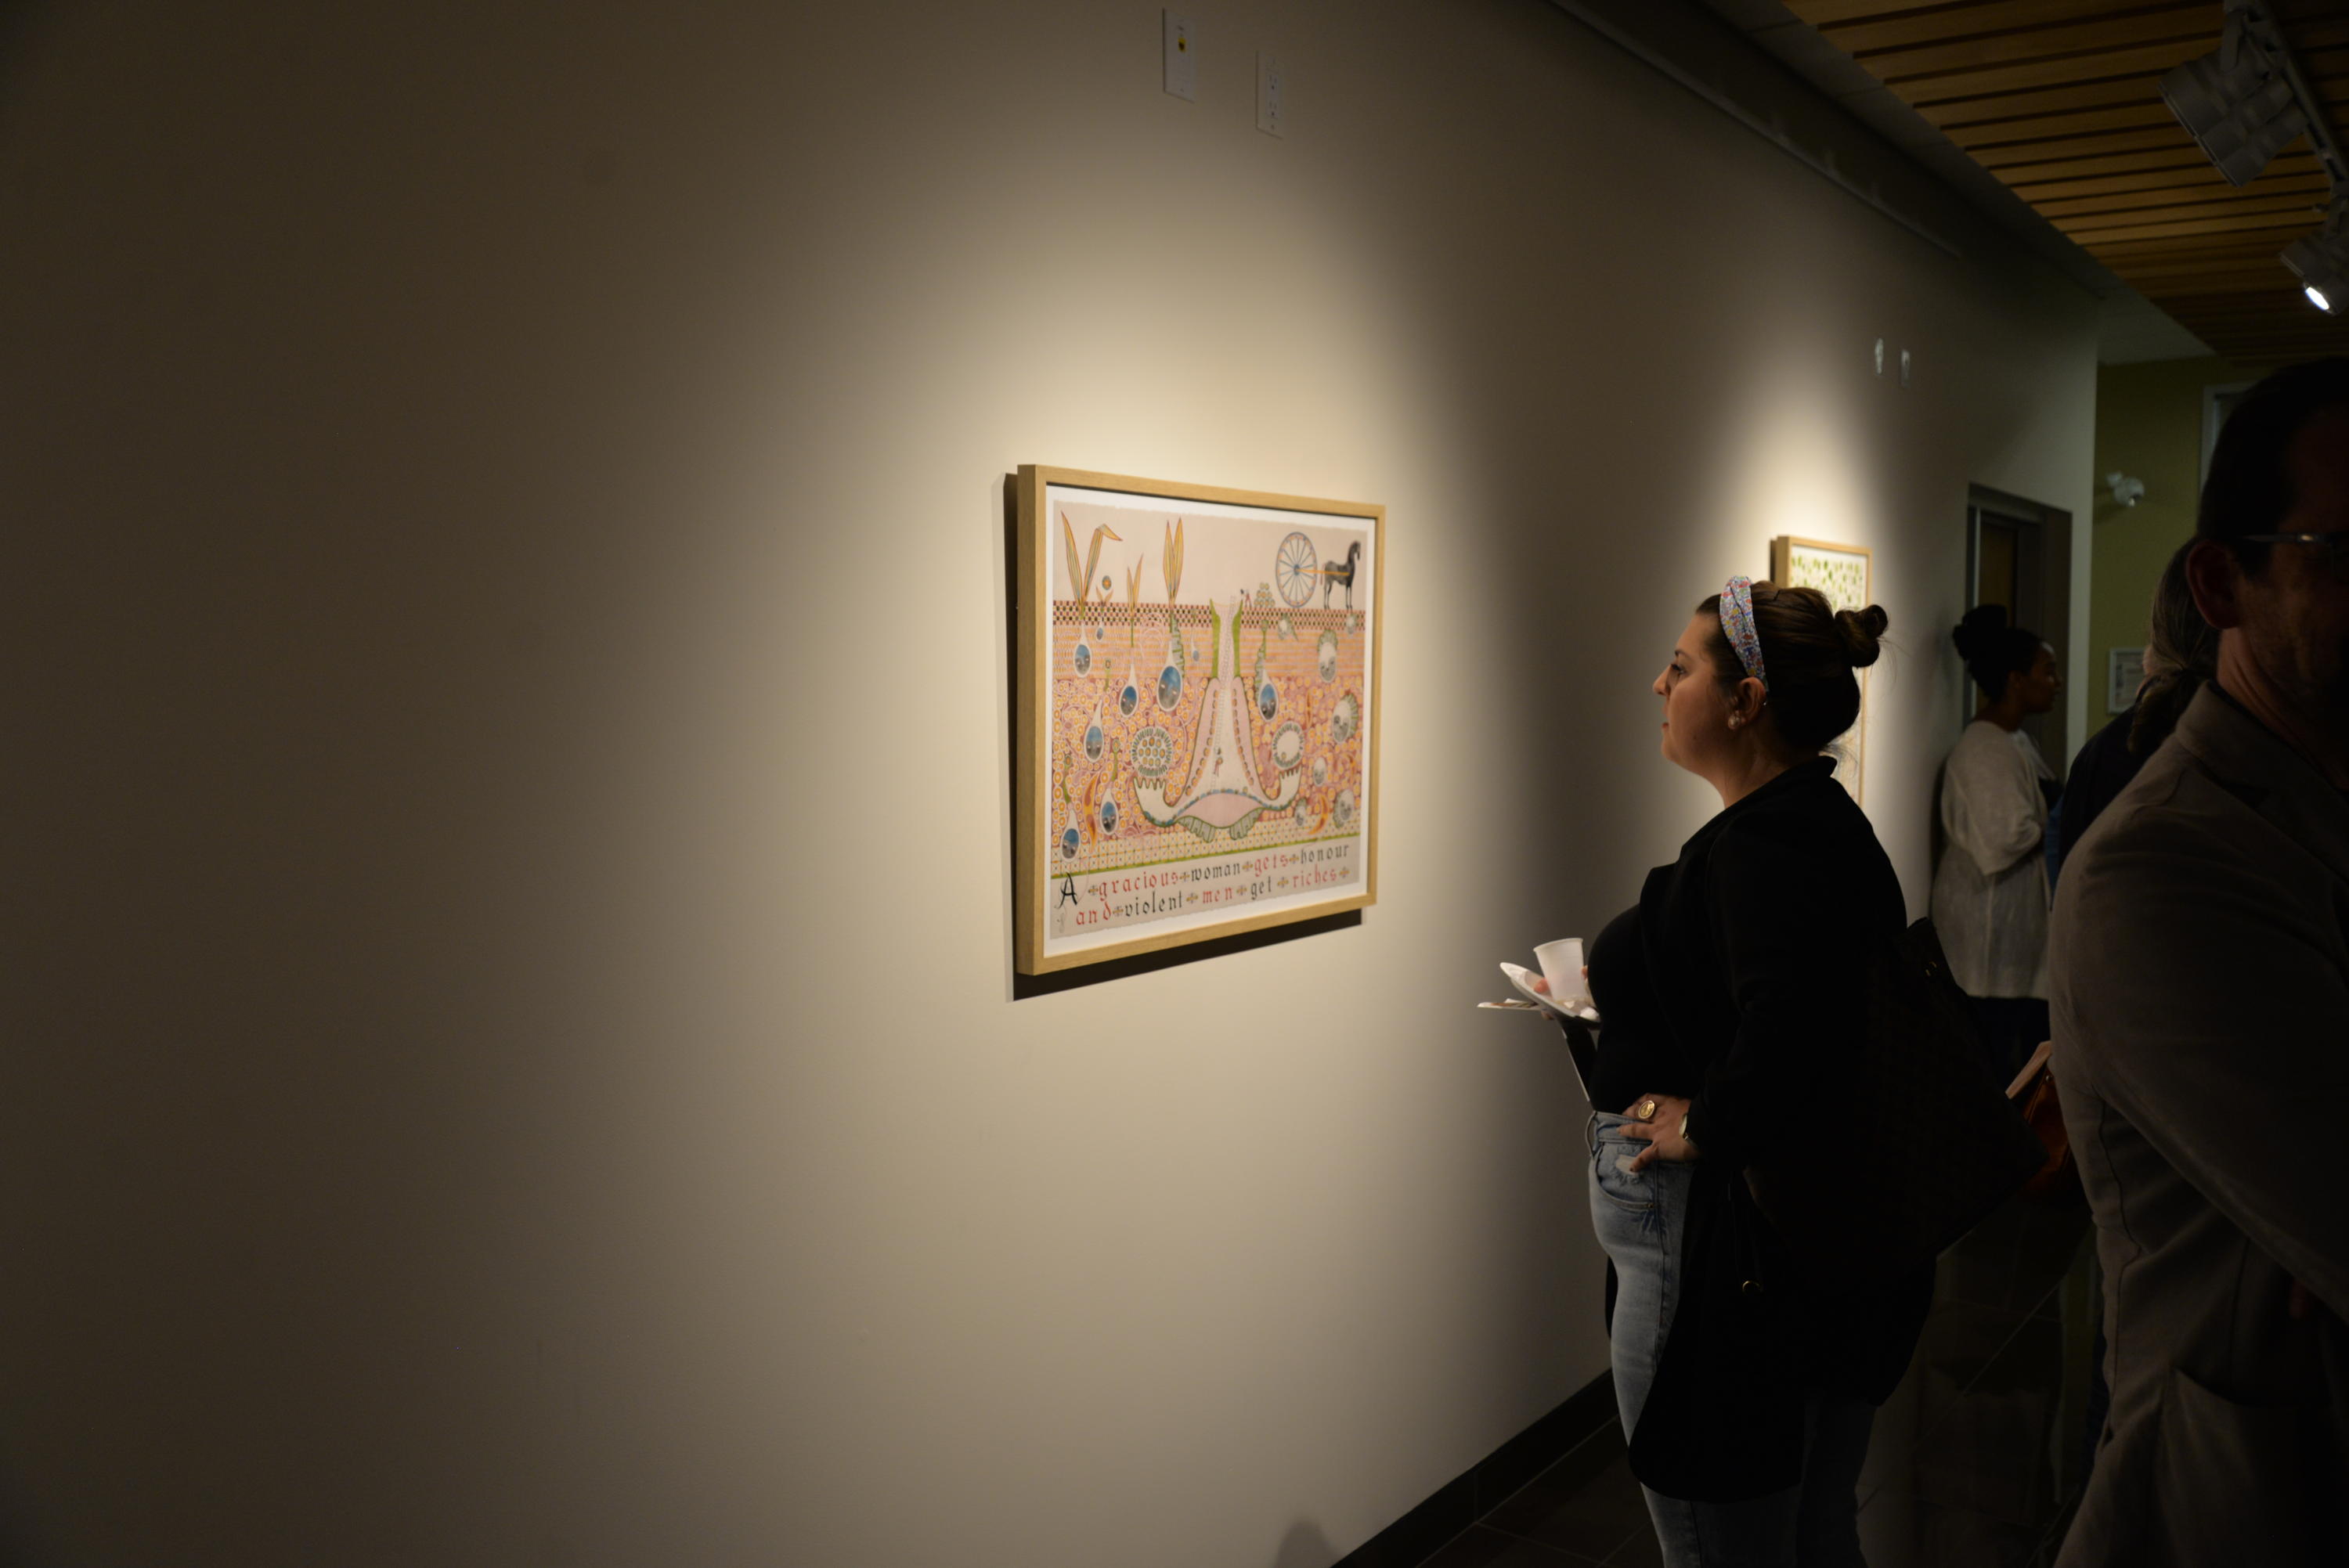 A woman looking at the art work